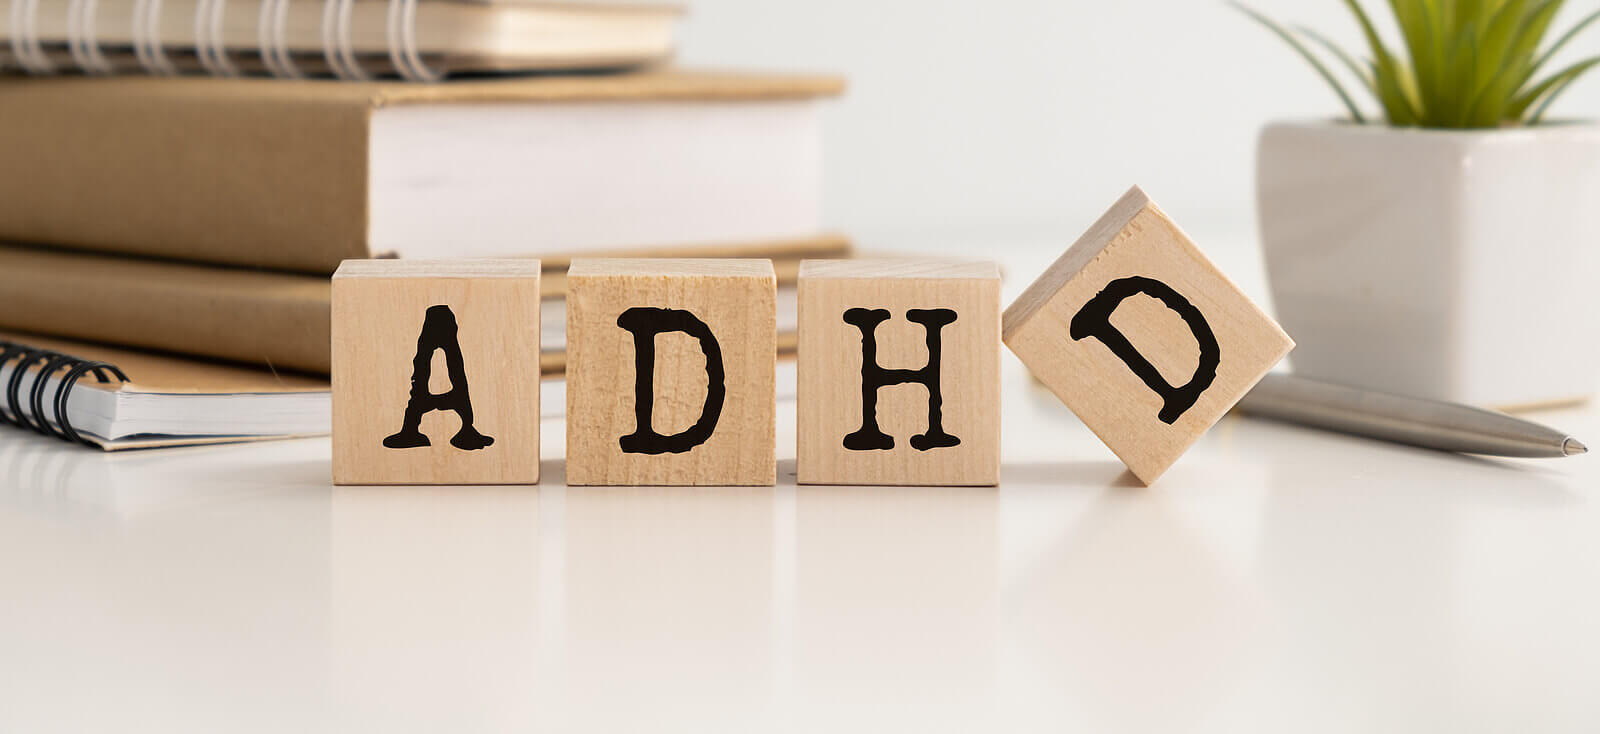 Here's What I've Found to Help Manage My ADHD